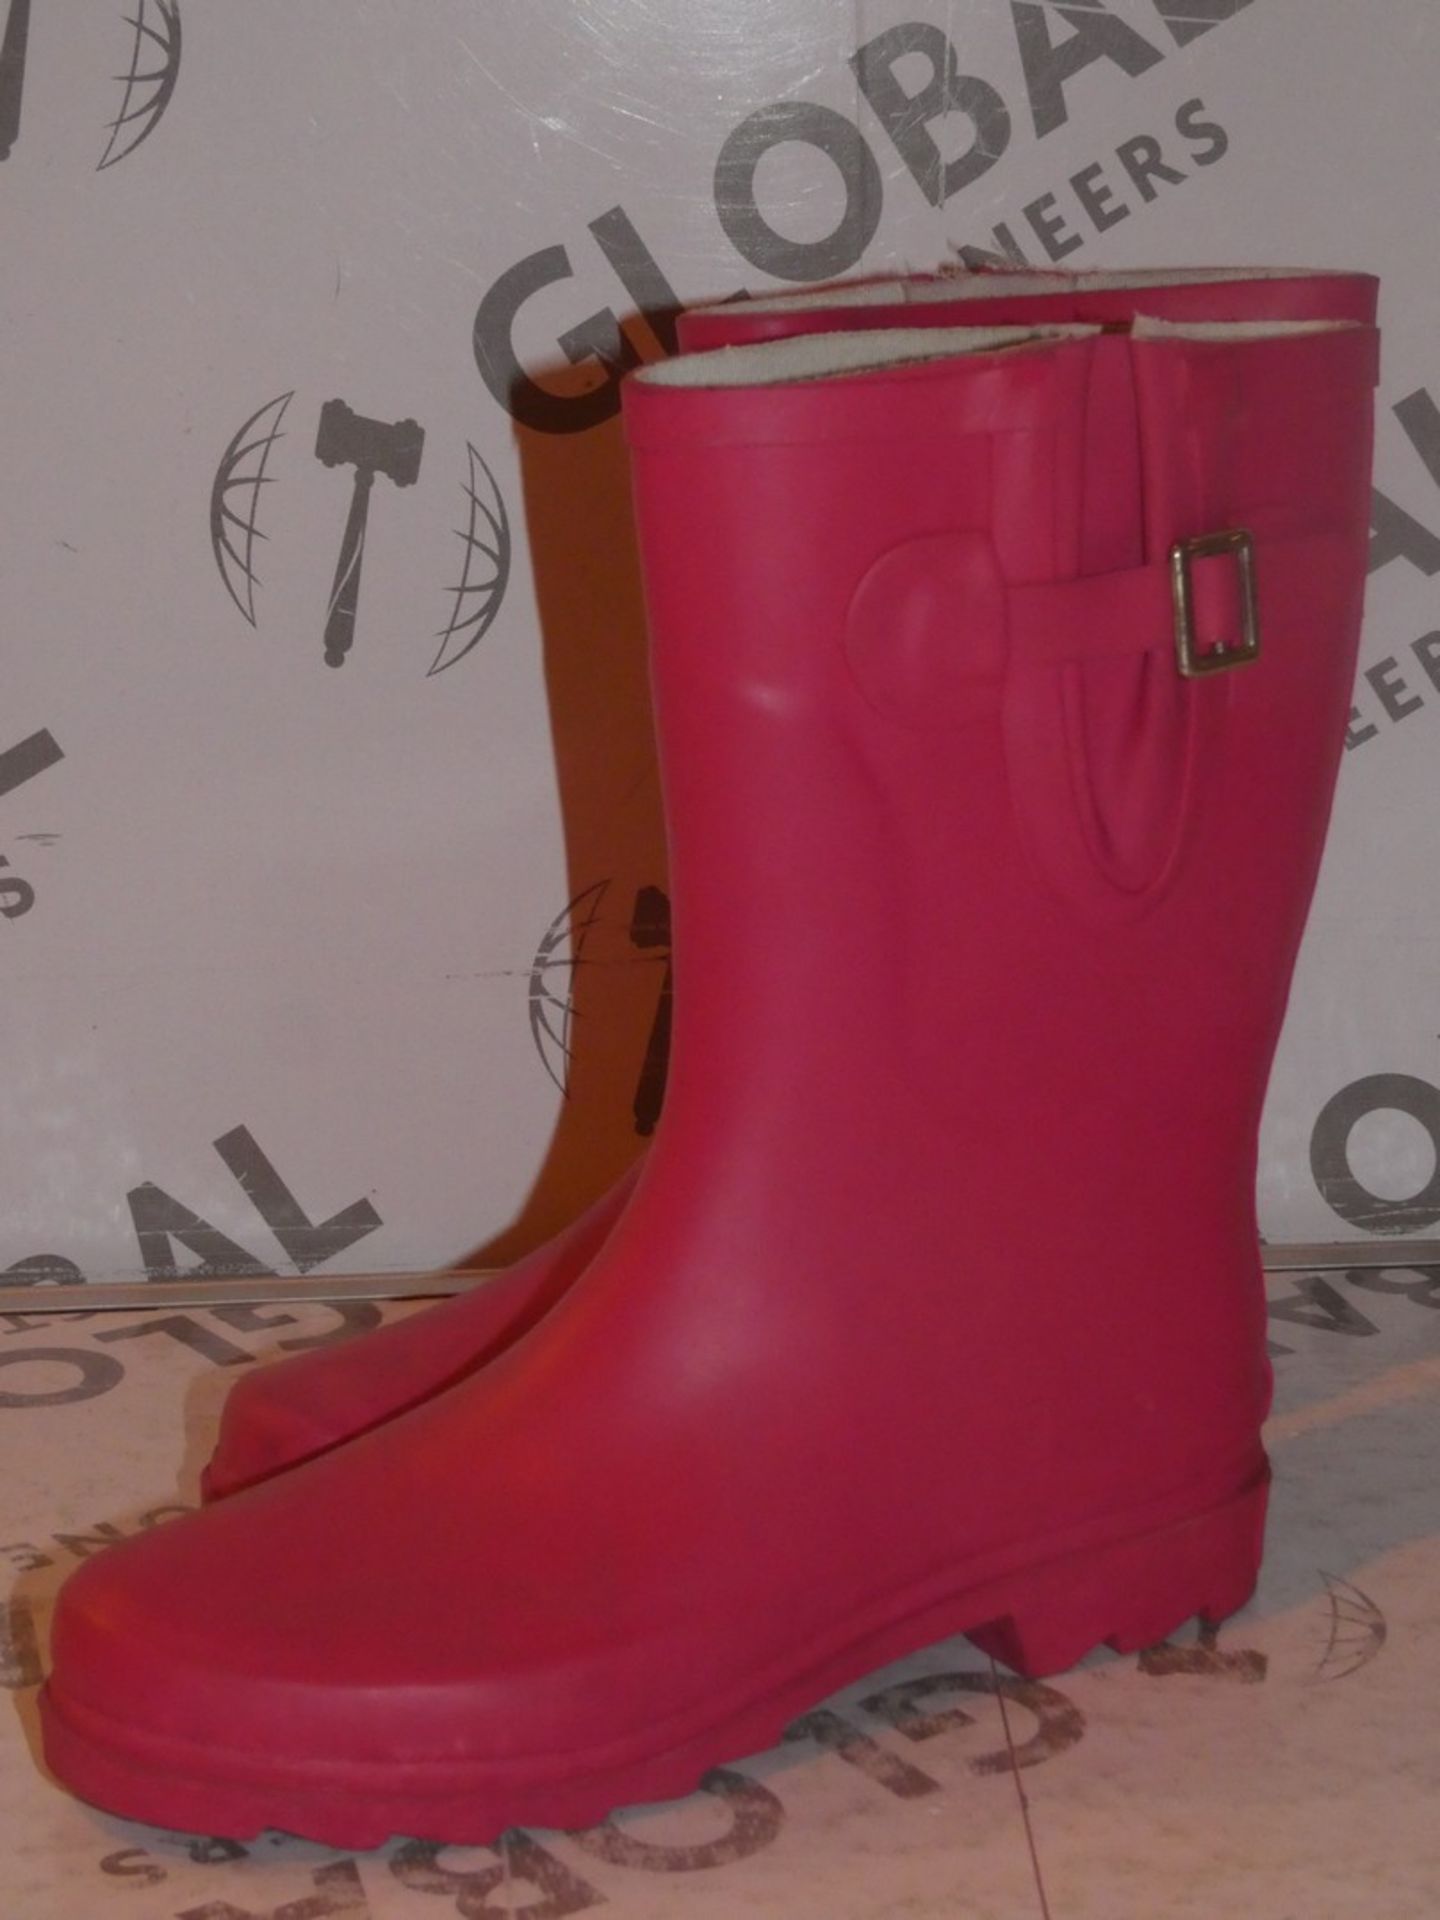 Brand New Pair of Oufan Size EU37 Hot Pink Wellingtons Boots